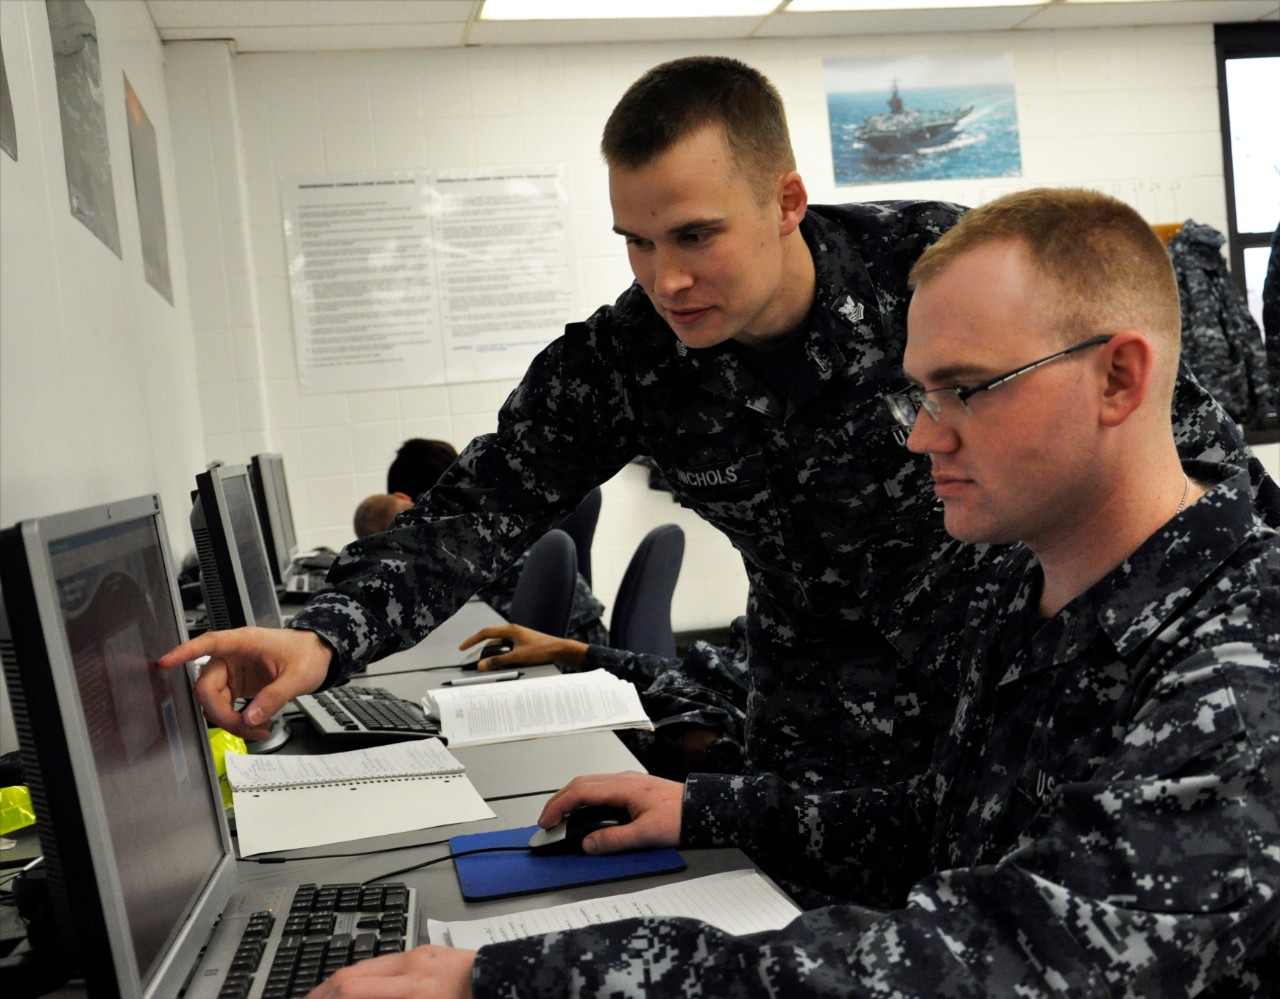 Hull Technician 1st Class Nolan R. Nichols, the 2001 Shore Sailor of the Year at the Center for Naval Engineering Learning Site, Great Lakee, answers a question on the computer-based training system with a student.